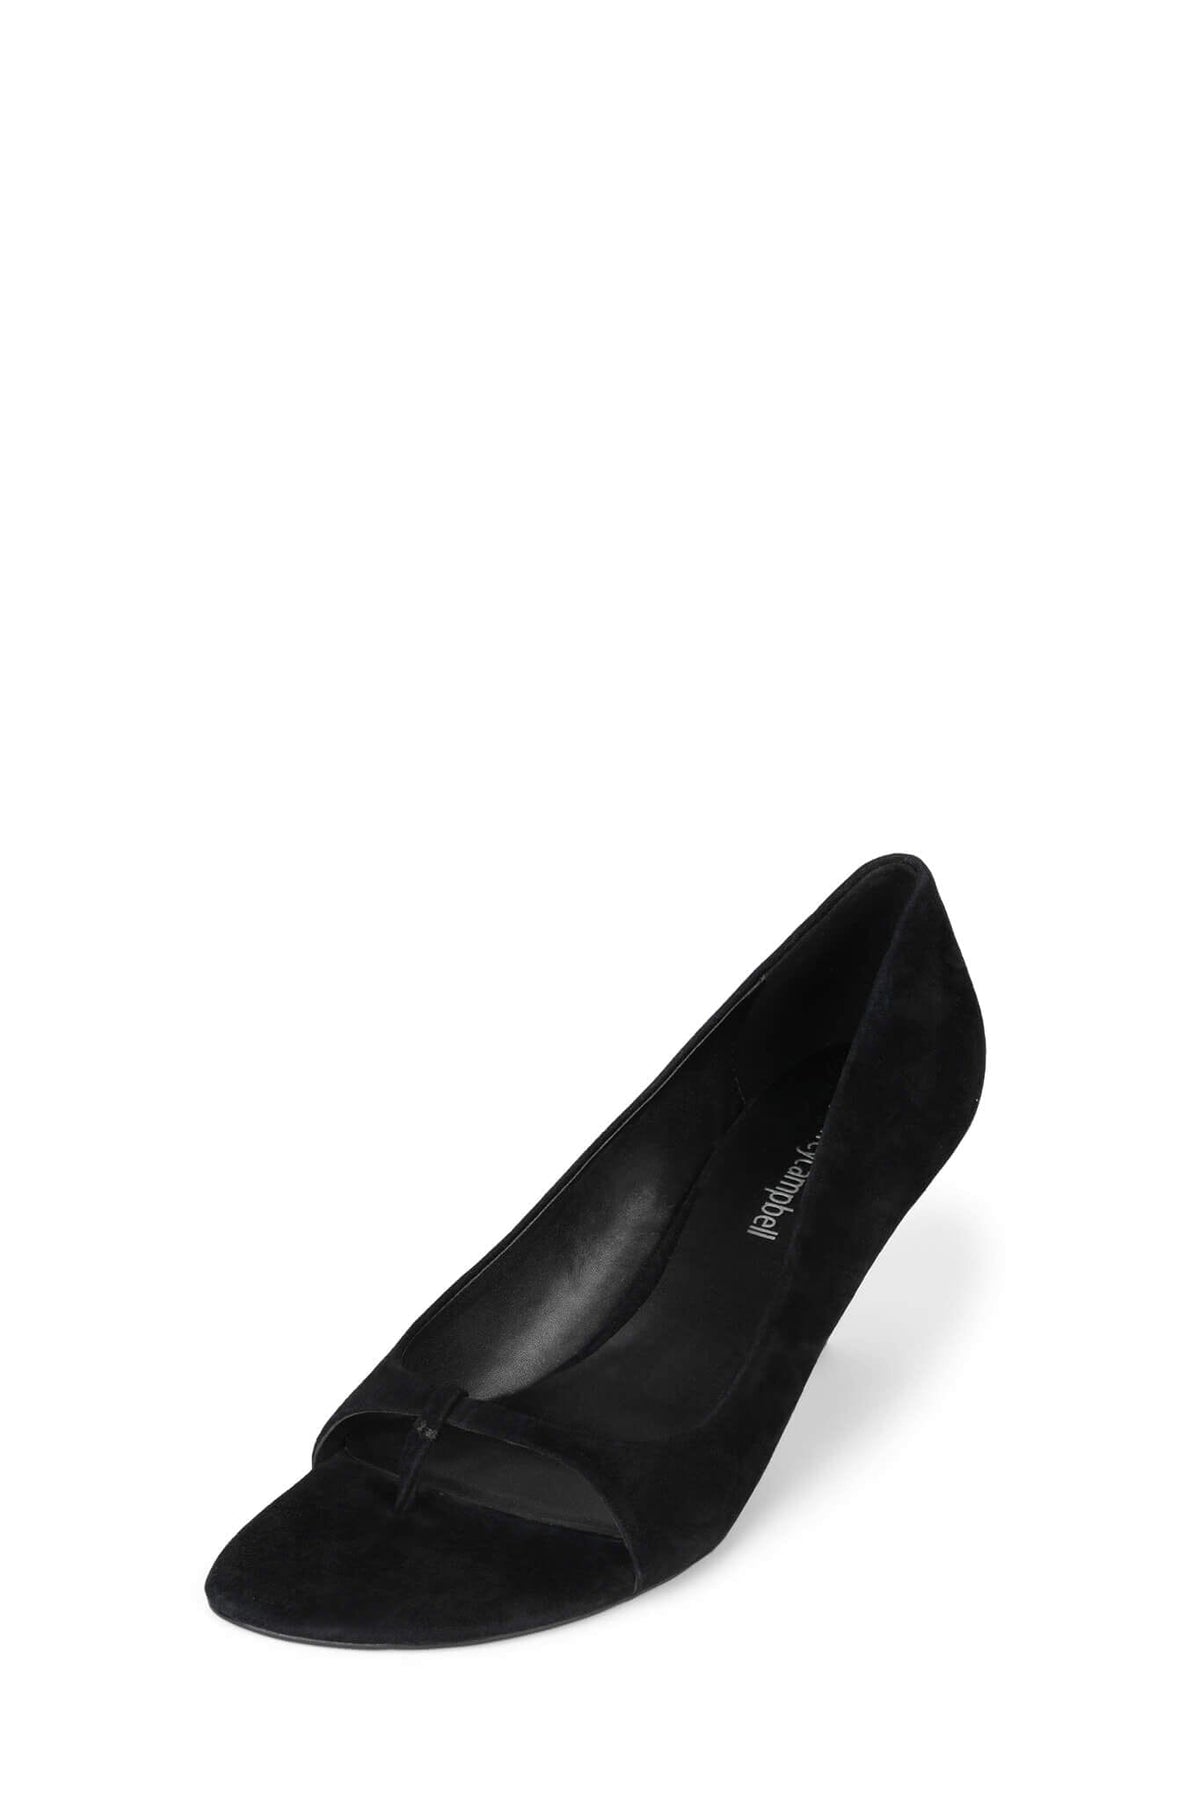 LATE-NIGHT Jeffrey Campbell Pumps Black Suede